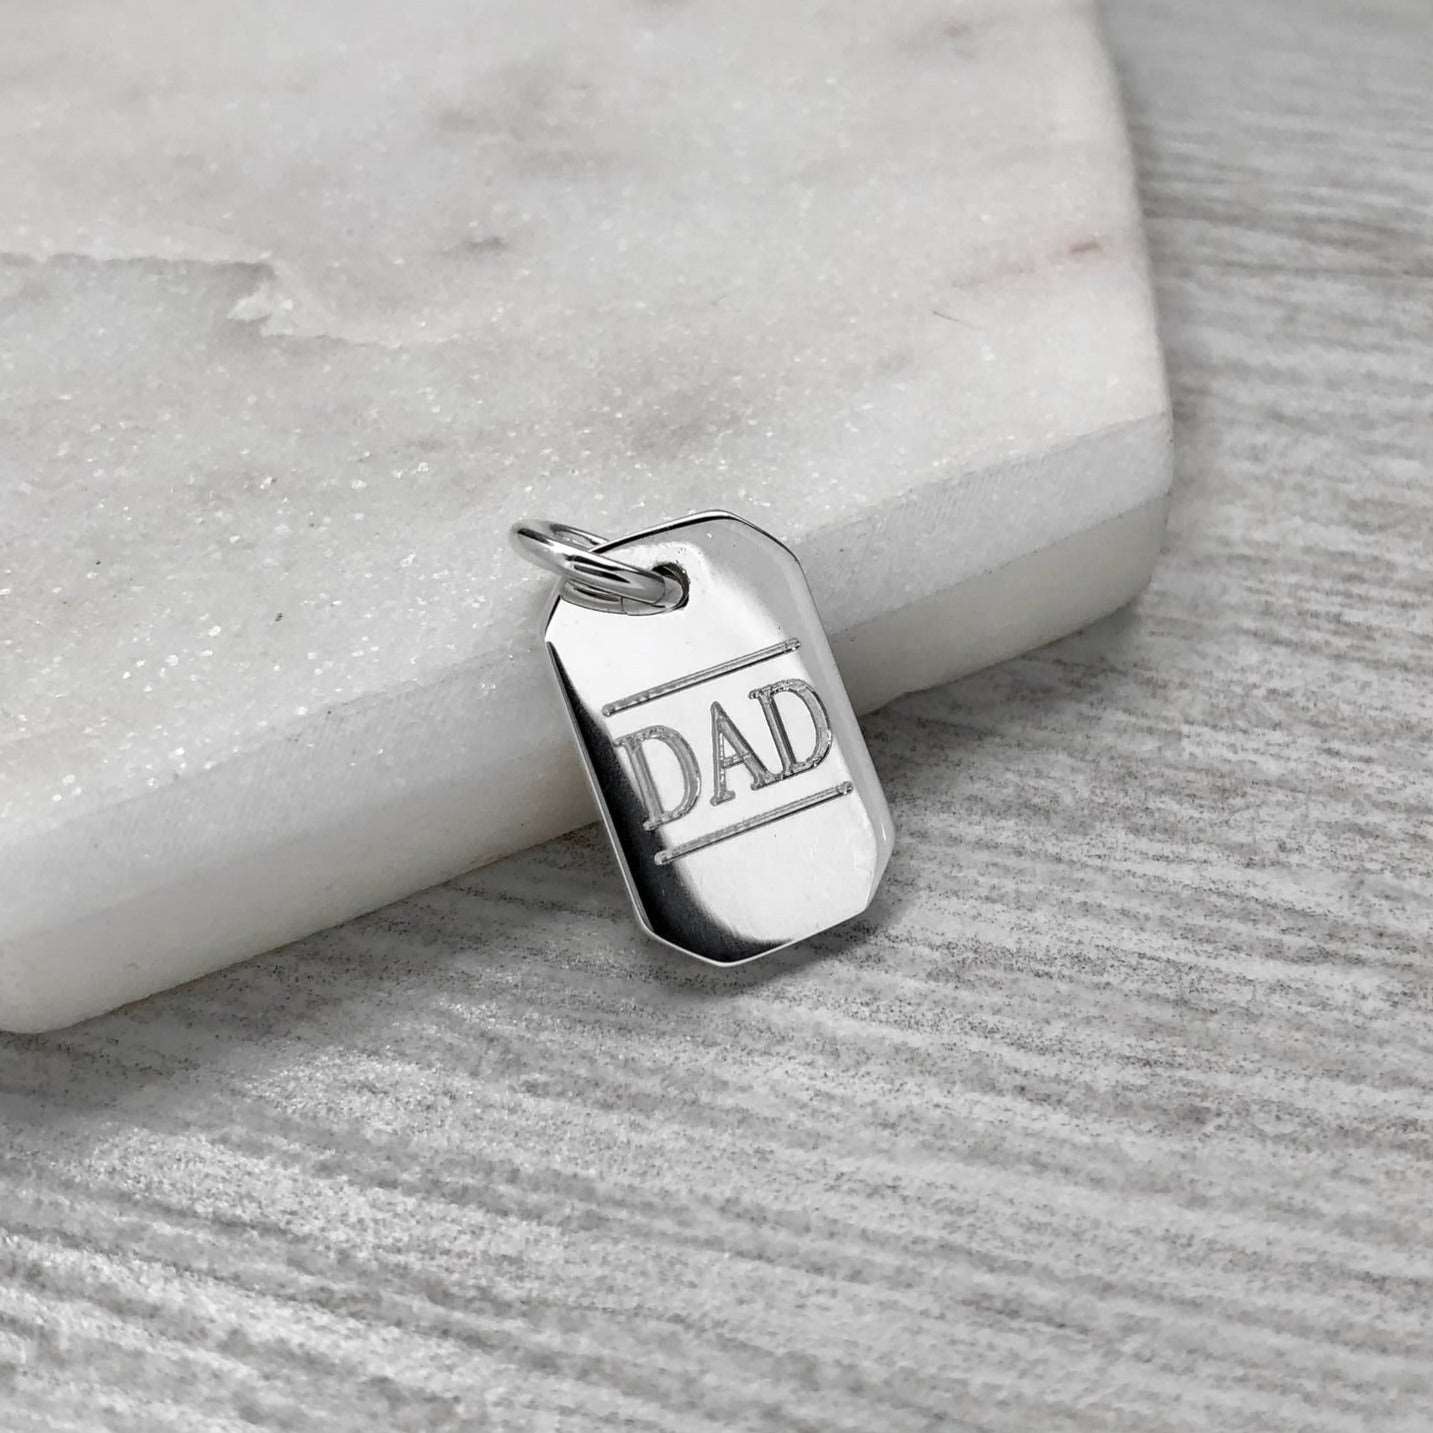 mens sterling silver dog tag pendant, engraved with DAD, gift for fathers day or birthday